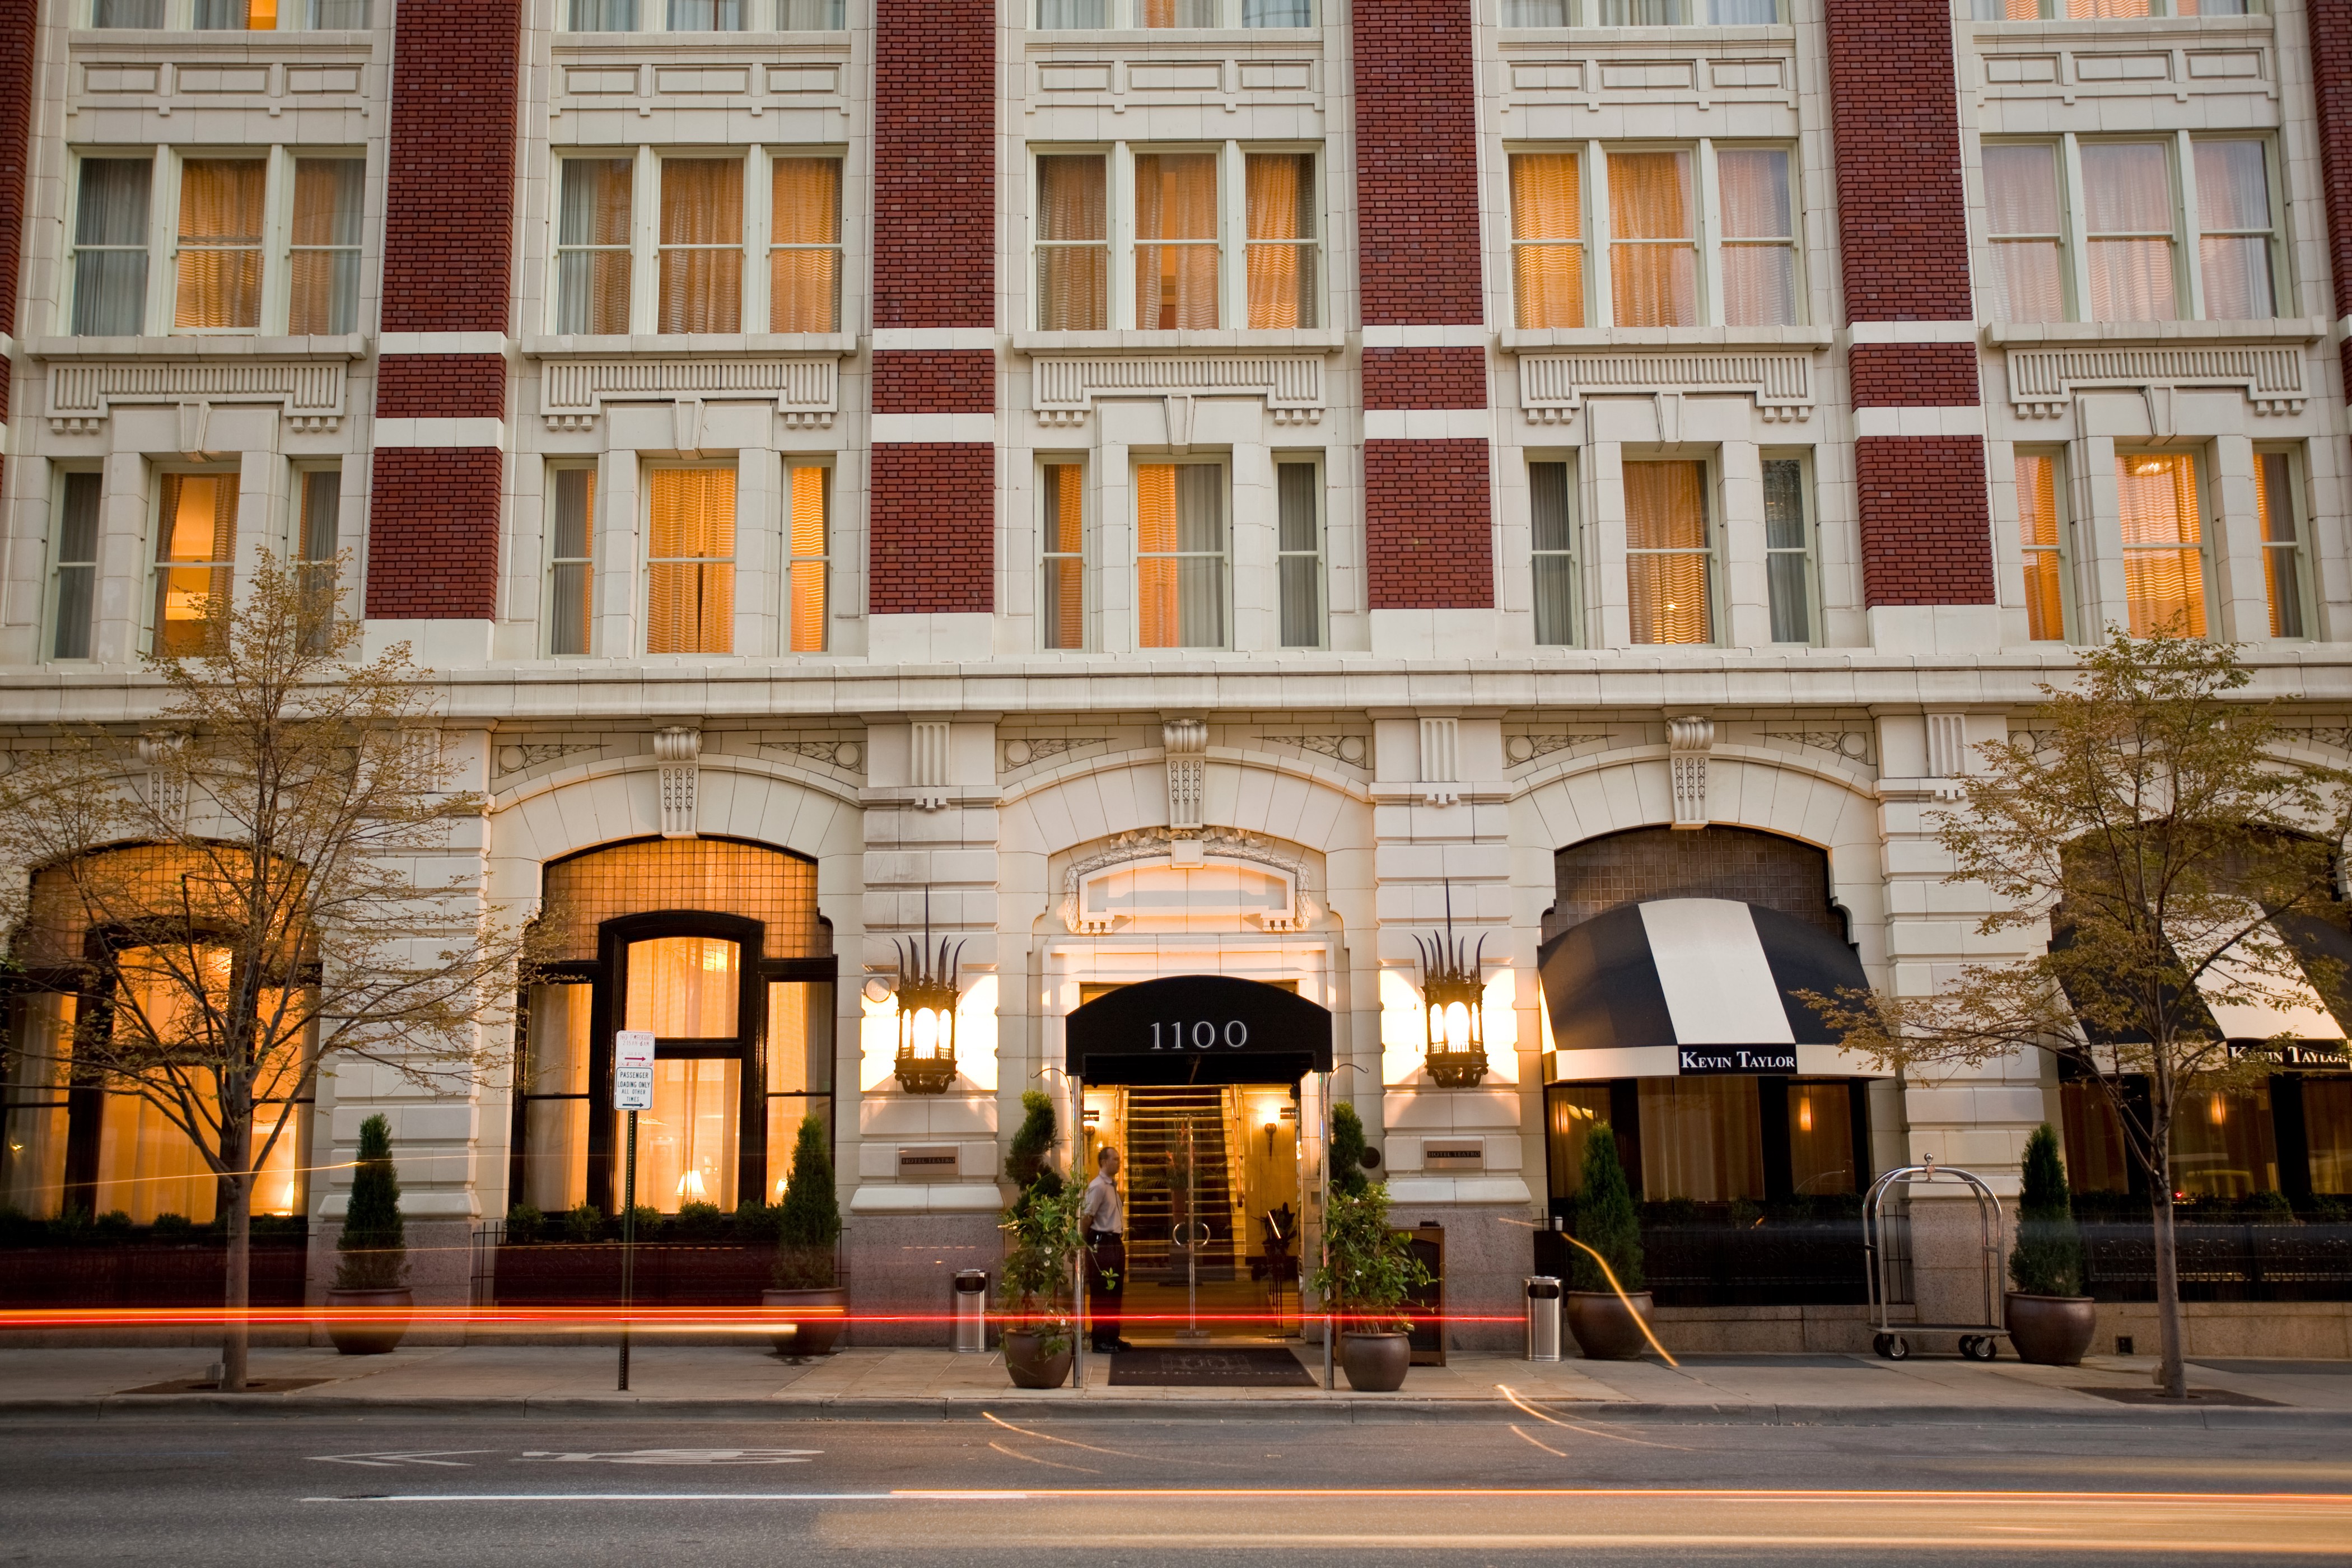 Hotel Teatro is an ideally located Denver Hotel.